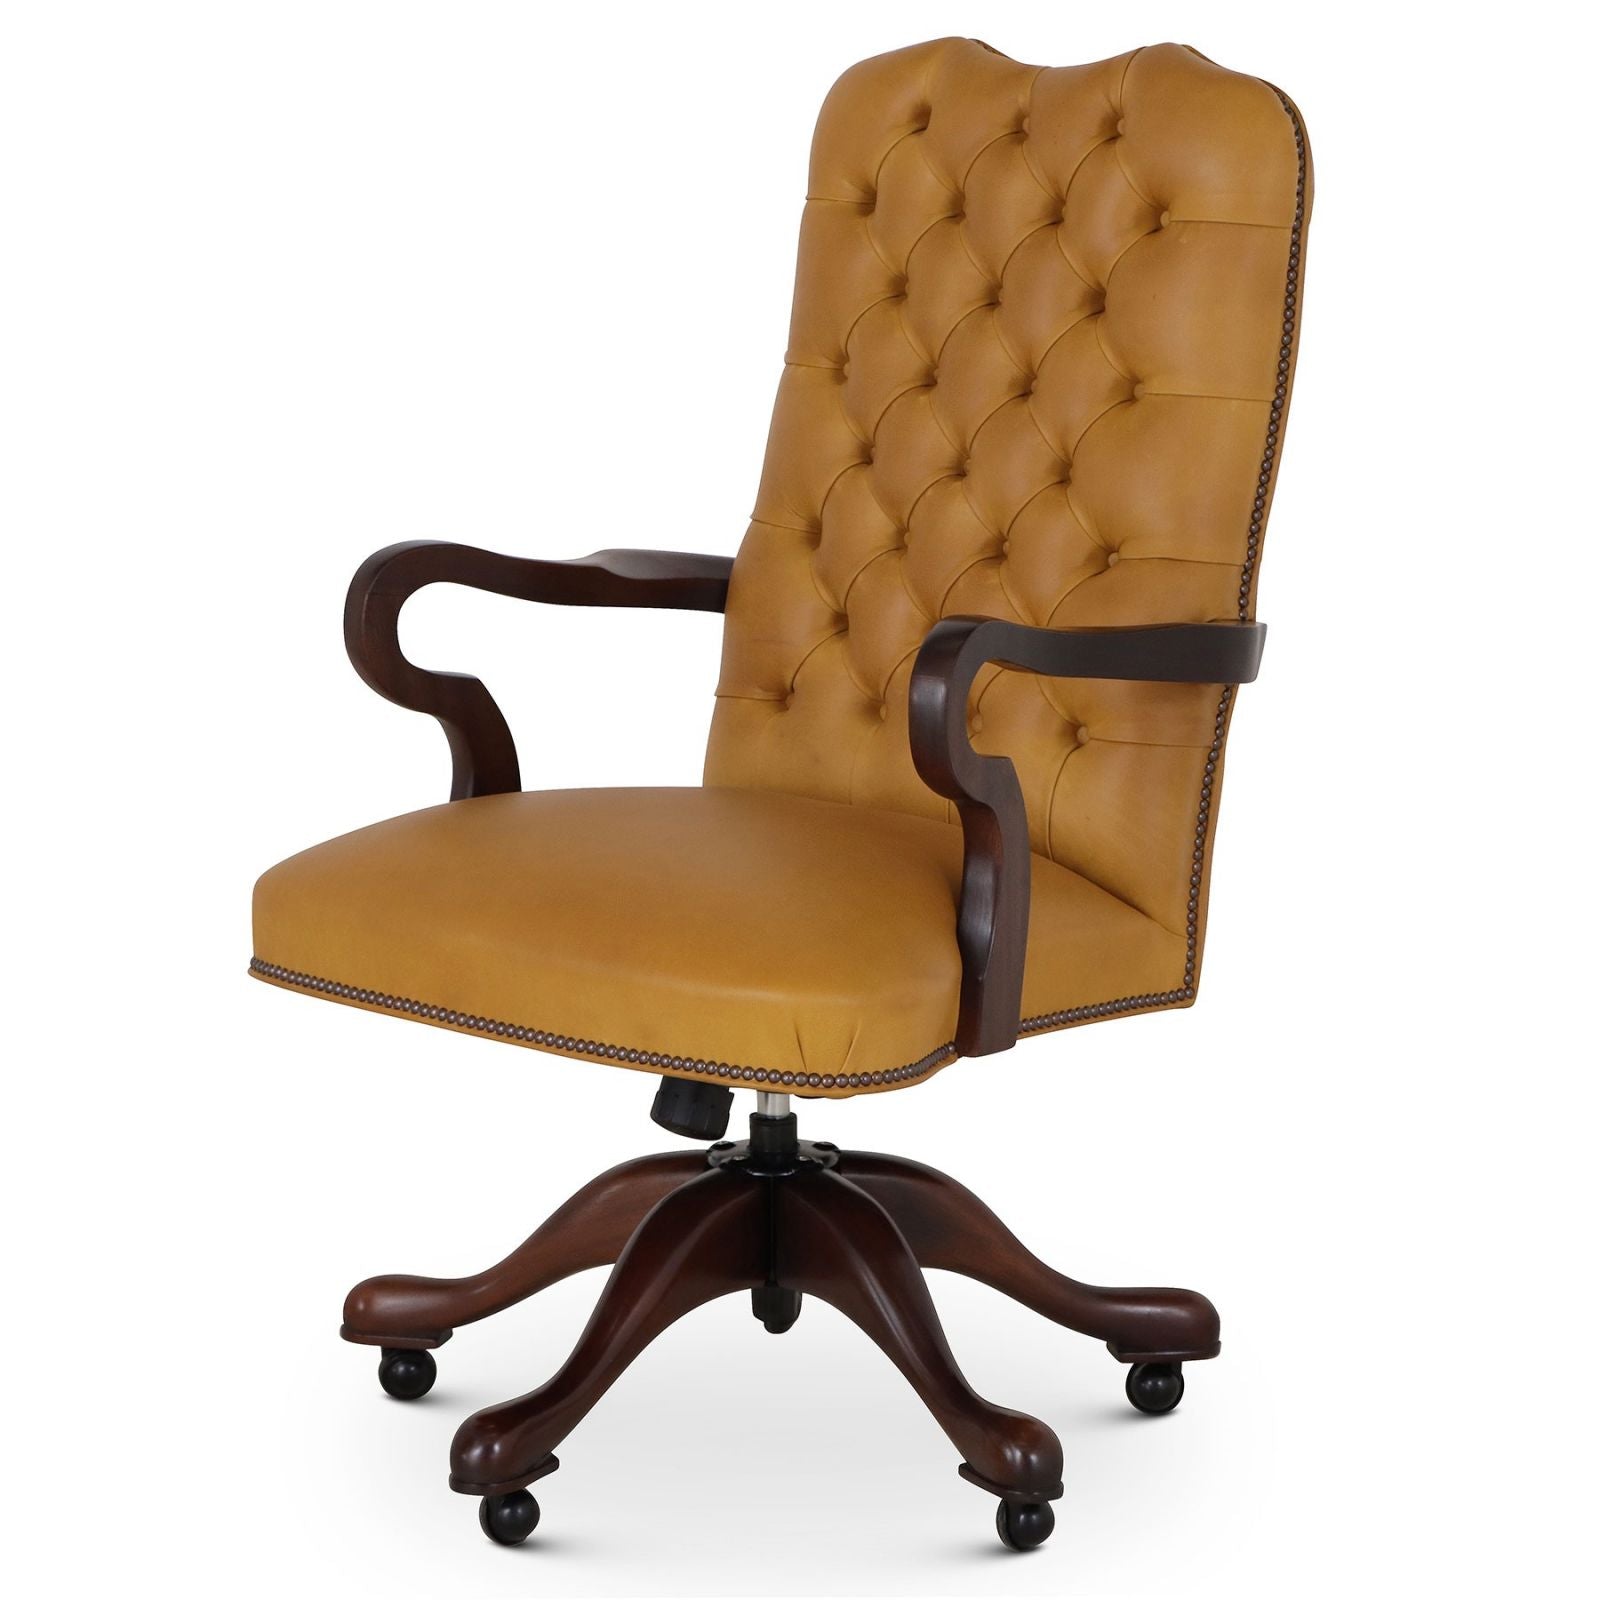 Swan buttoned leather swivel chair - Grande Sycamore